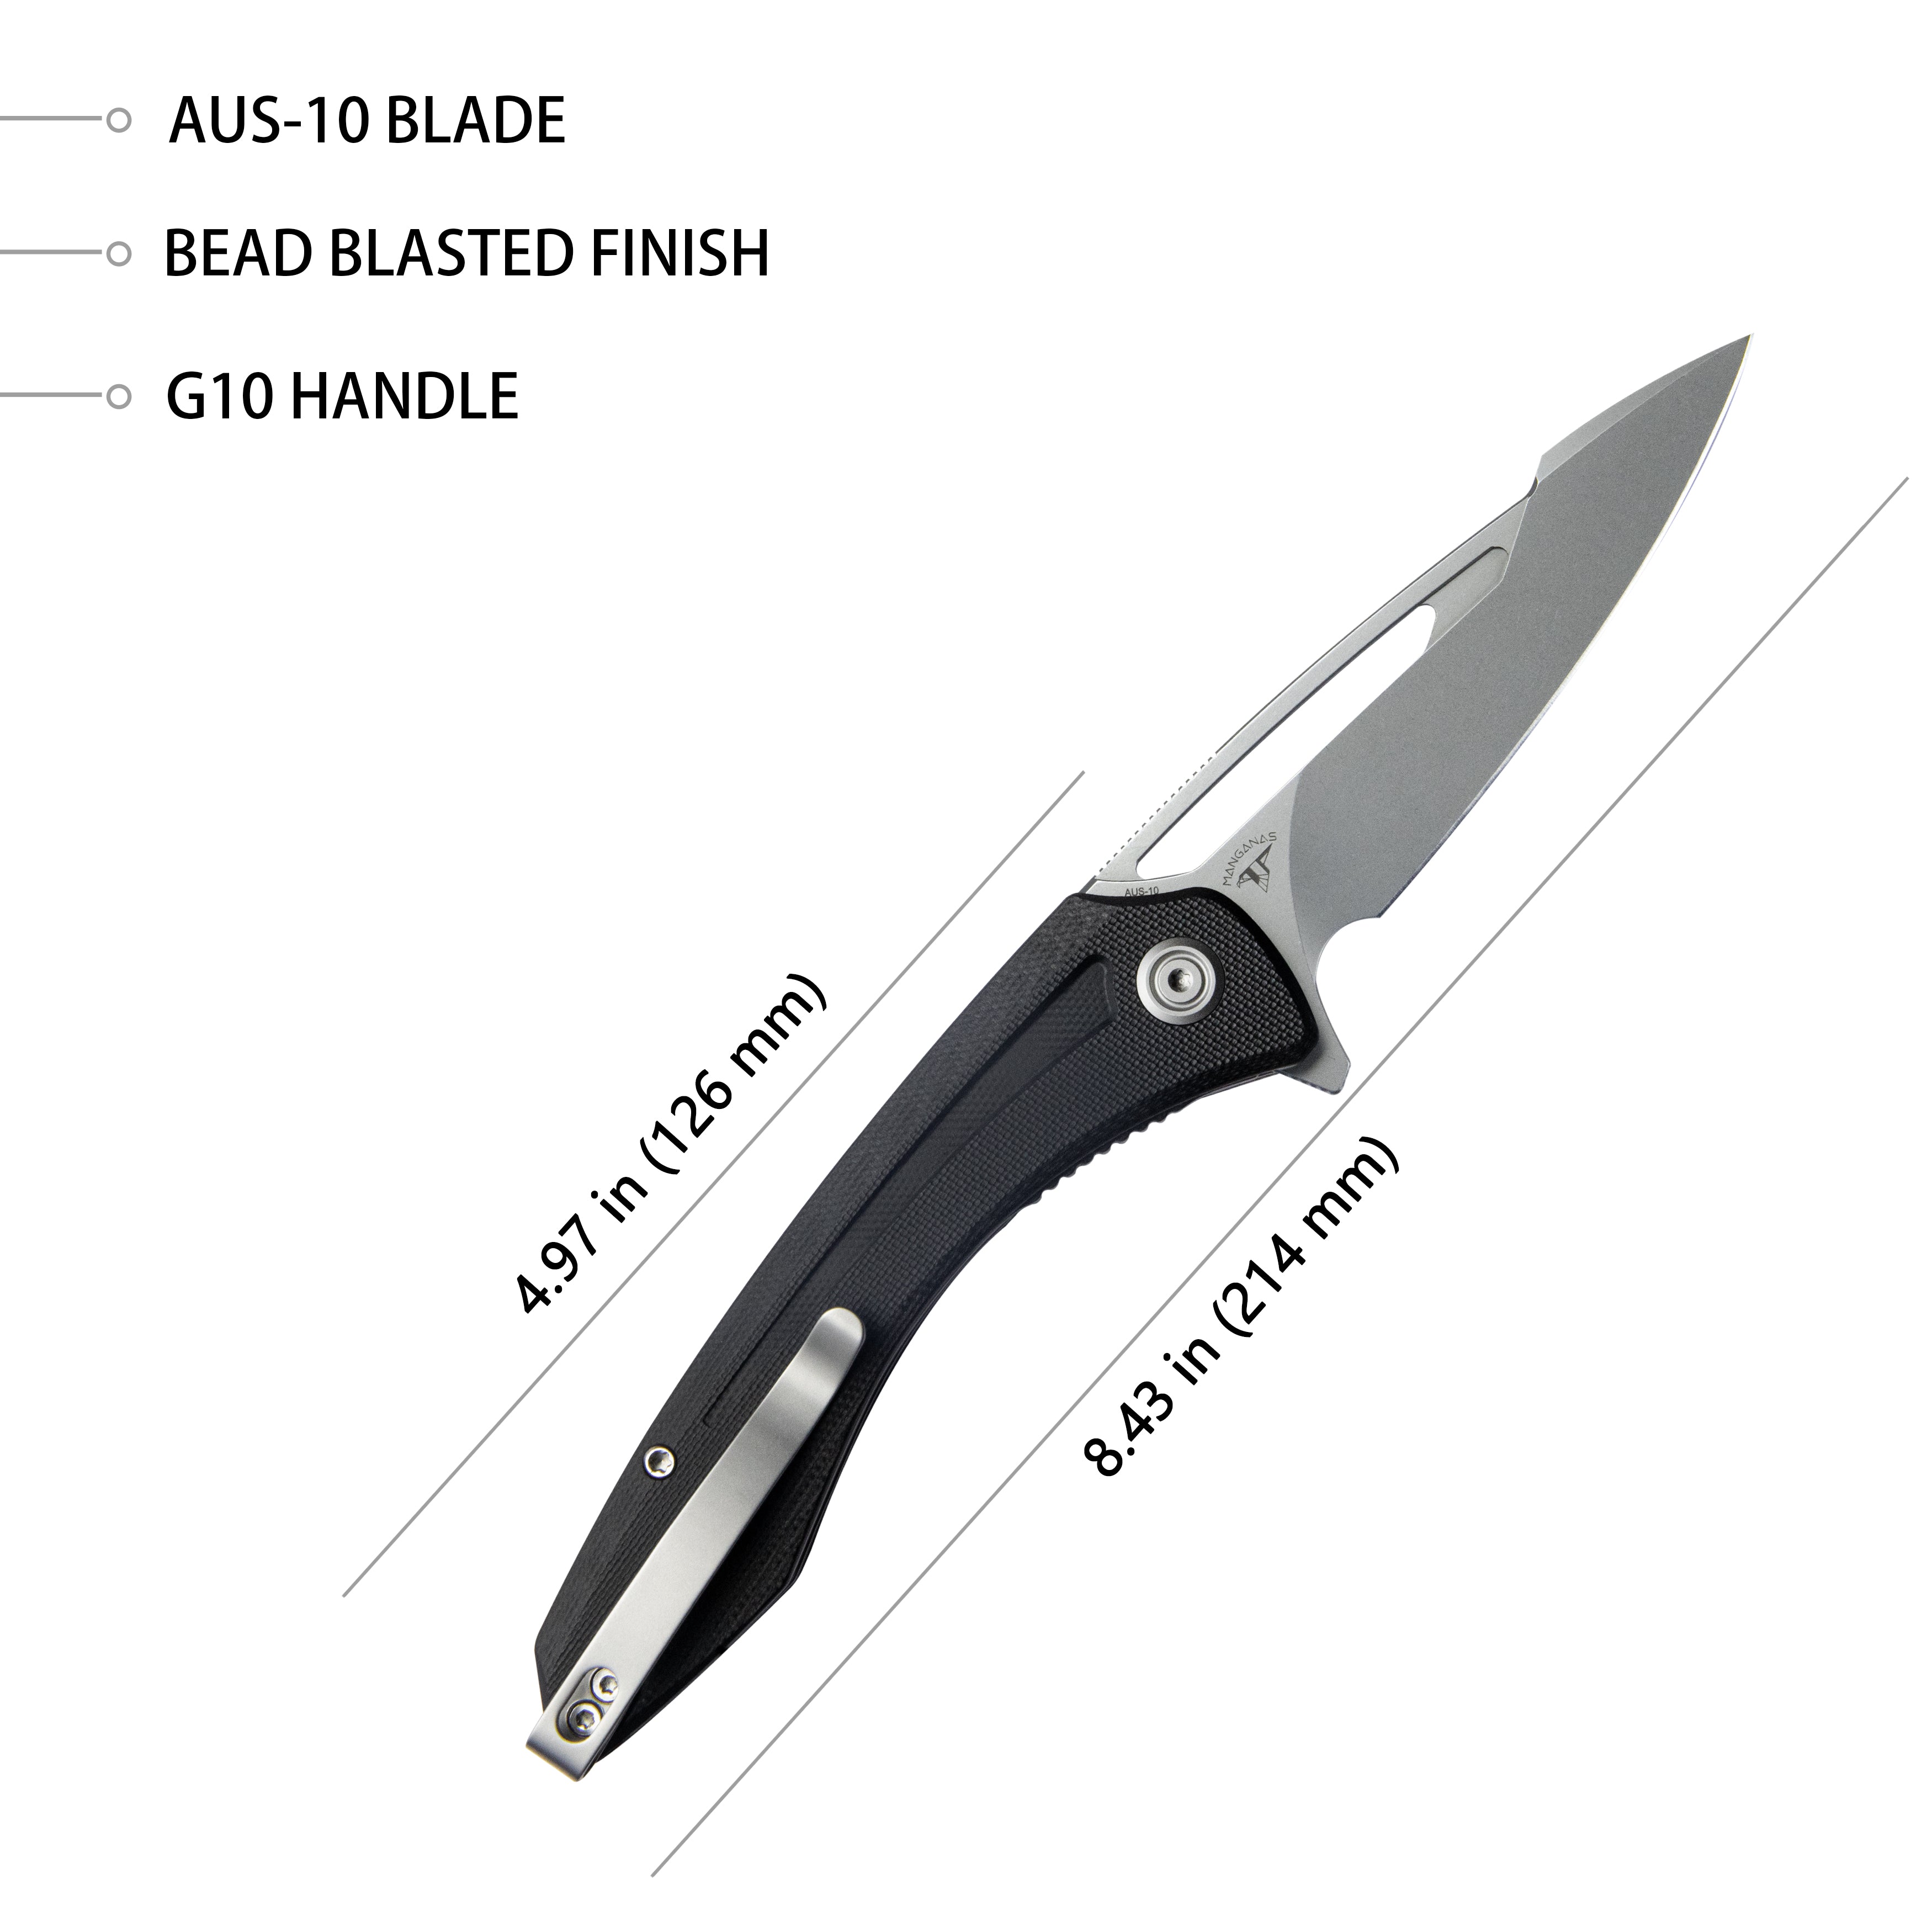 Merced Folding Knife 3.46" Beadblasted AUS-10 Blade With Durable Black G10 Handle Reliable Tactical Pocket Knife KU345A